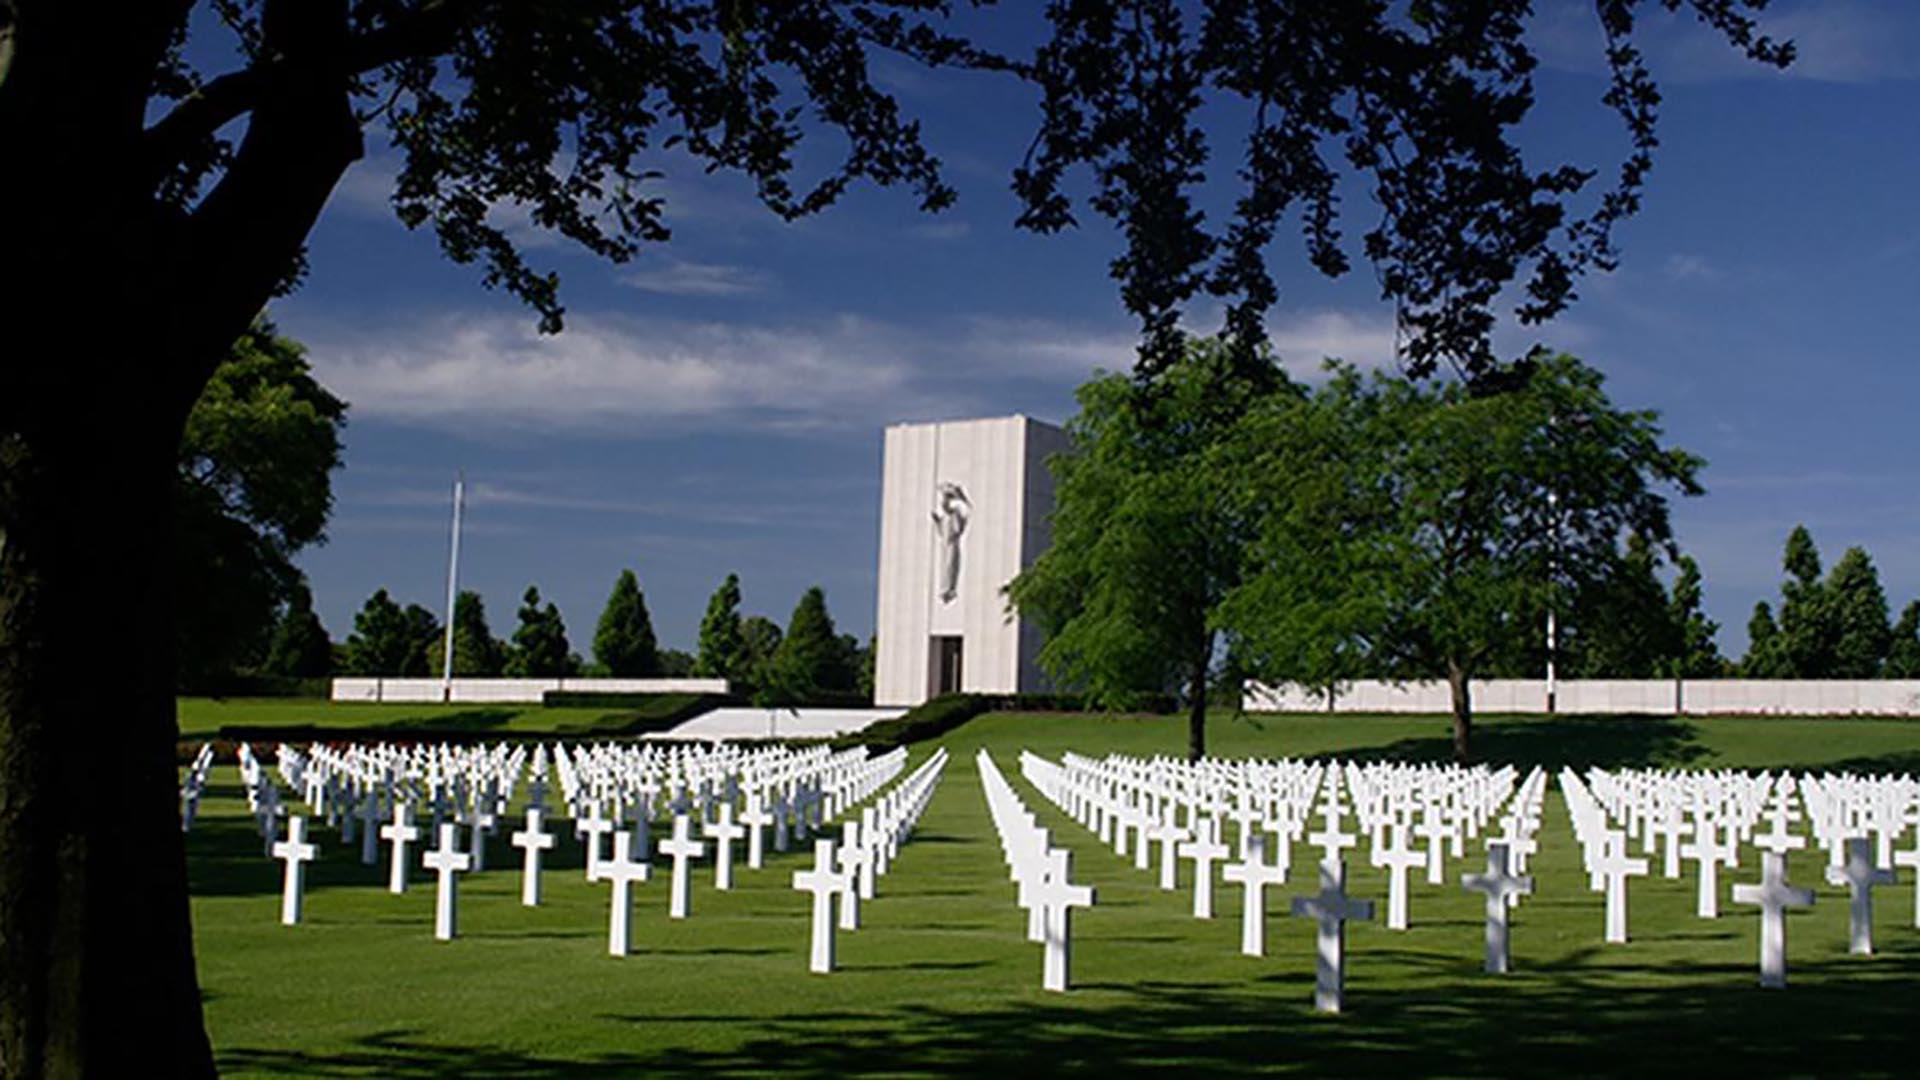 A military graveyard featuring dozens of white crosses.